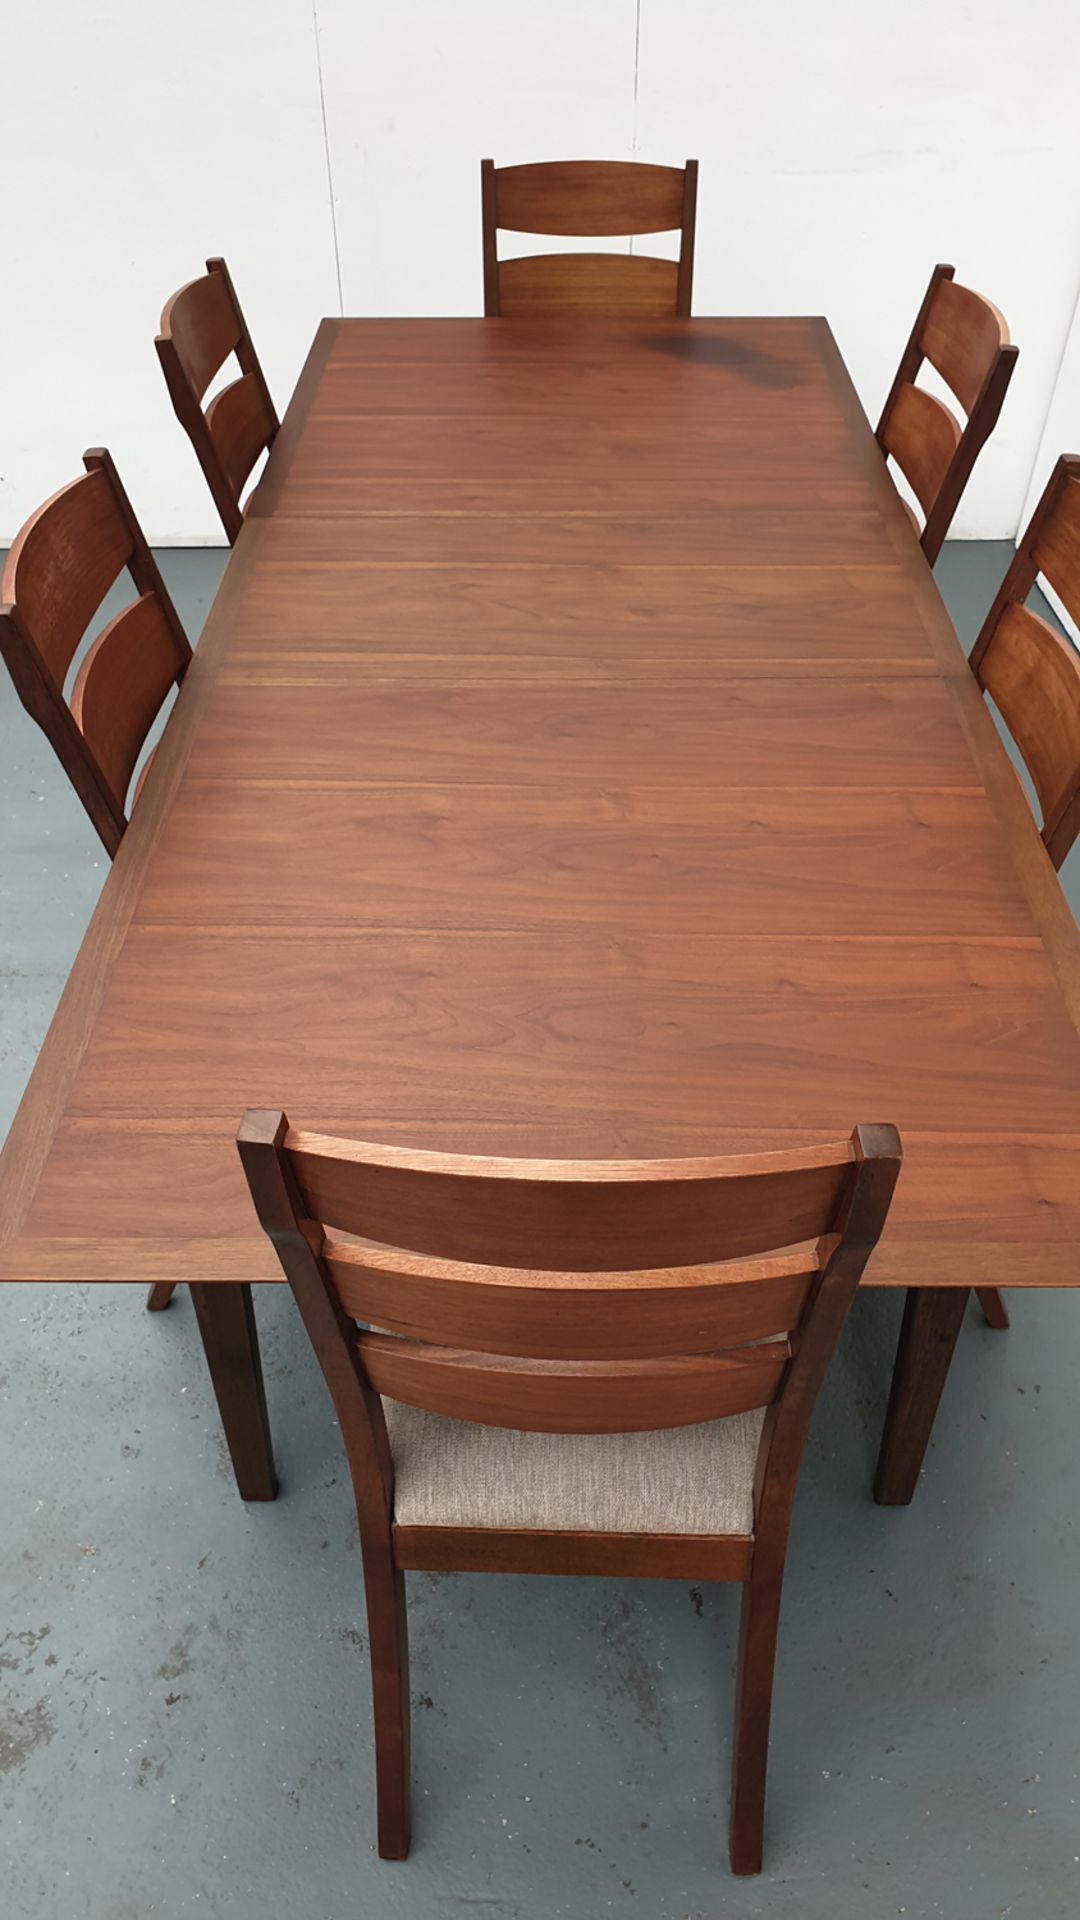 Solid Wood Dining Table & Chairs. Approx Dimensions 1700mm x 900mm x 780mm High. - Image 9 of 11